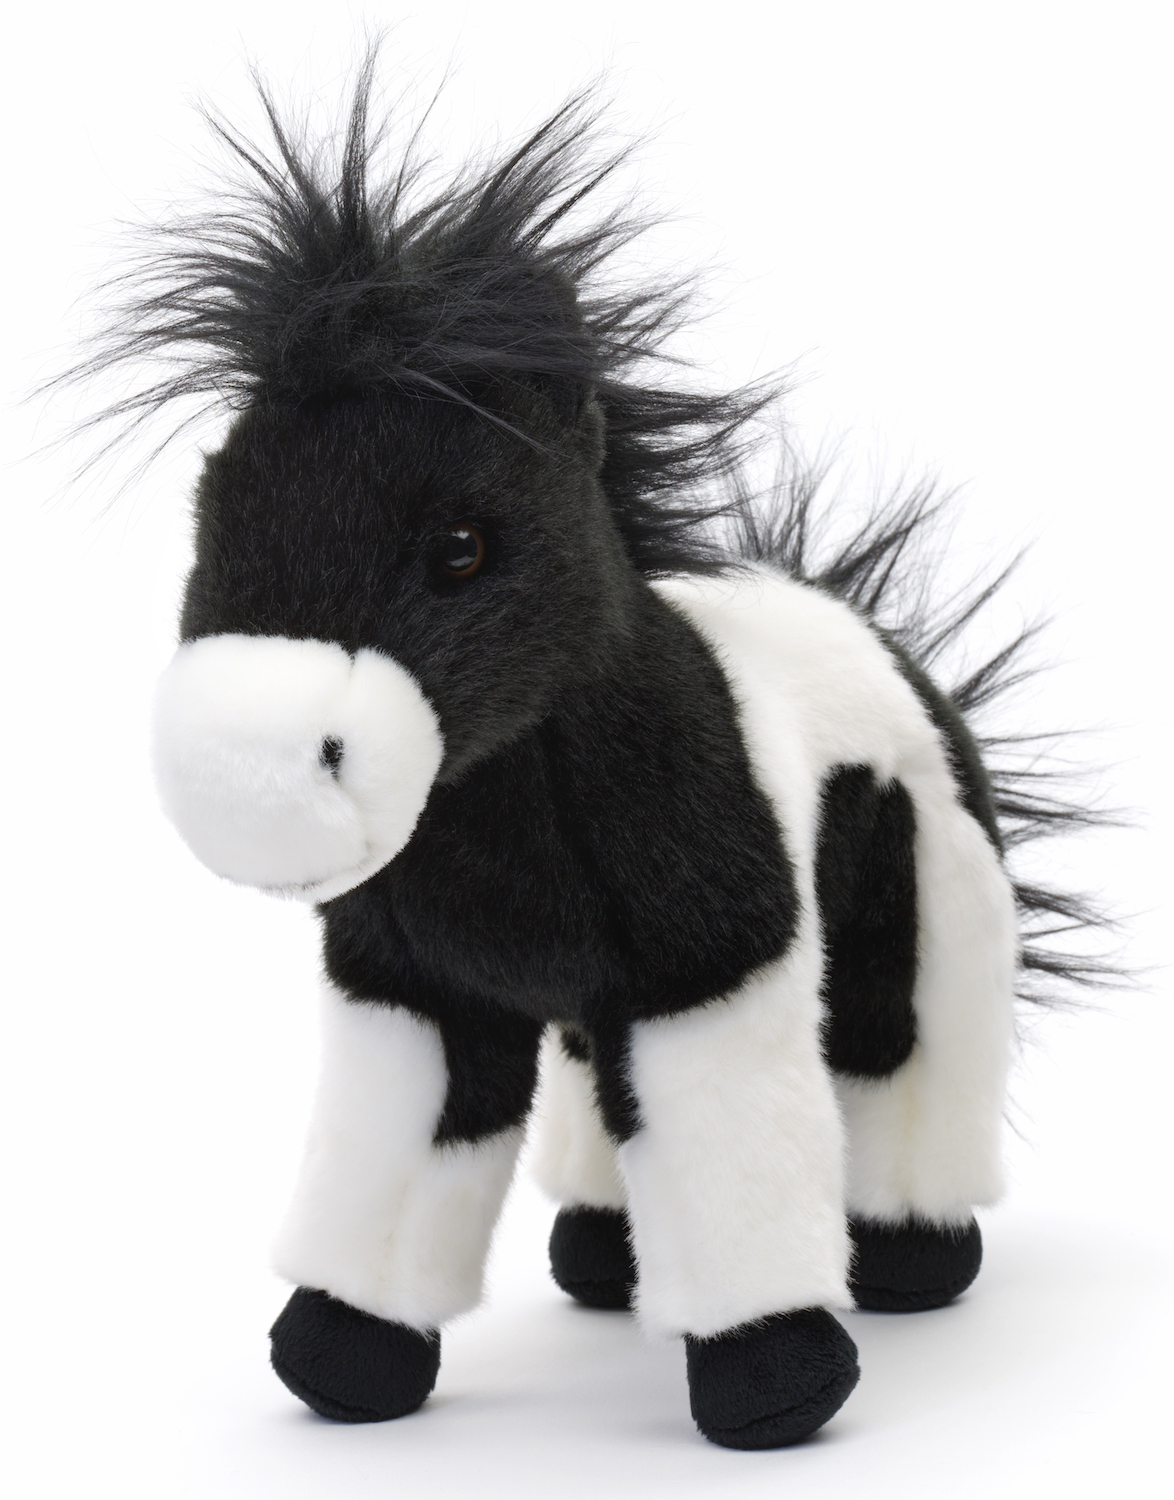 Horse black and white, standing - 23 cm (height)